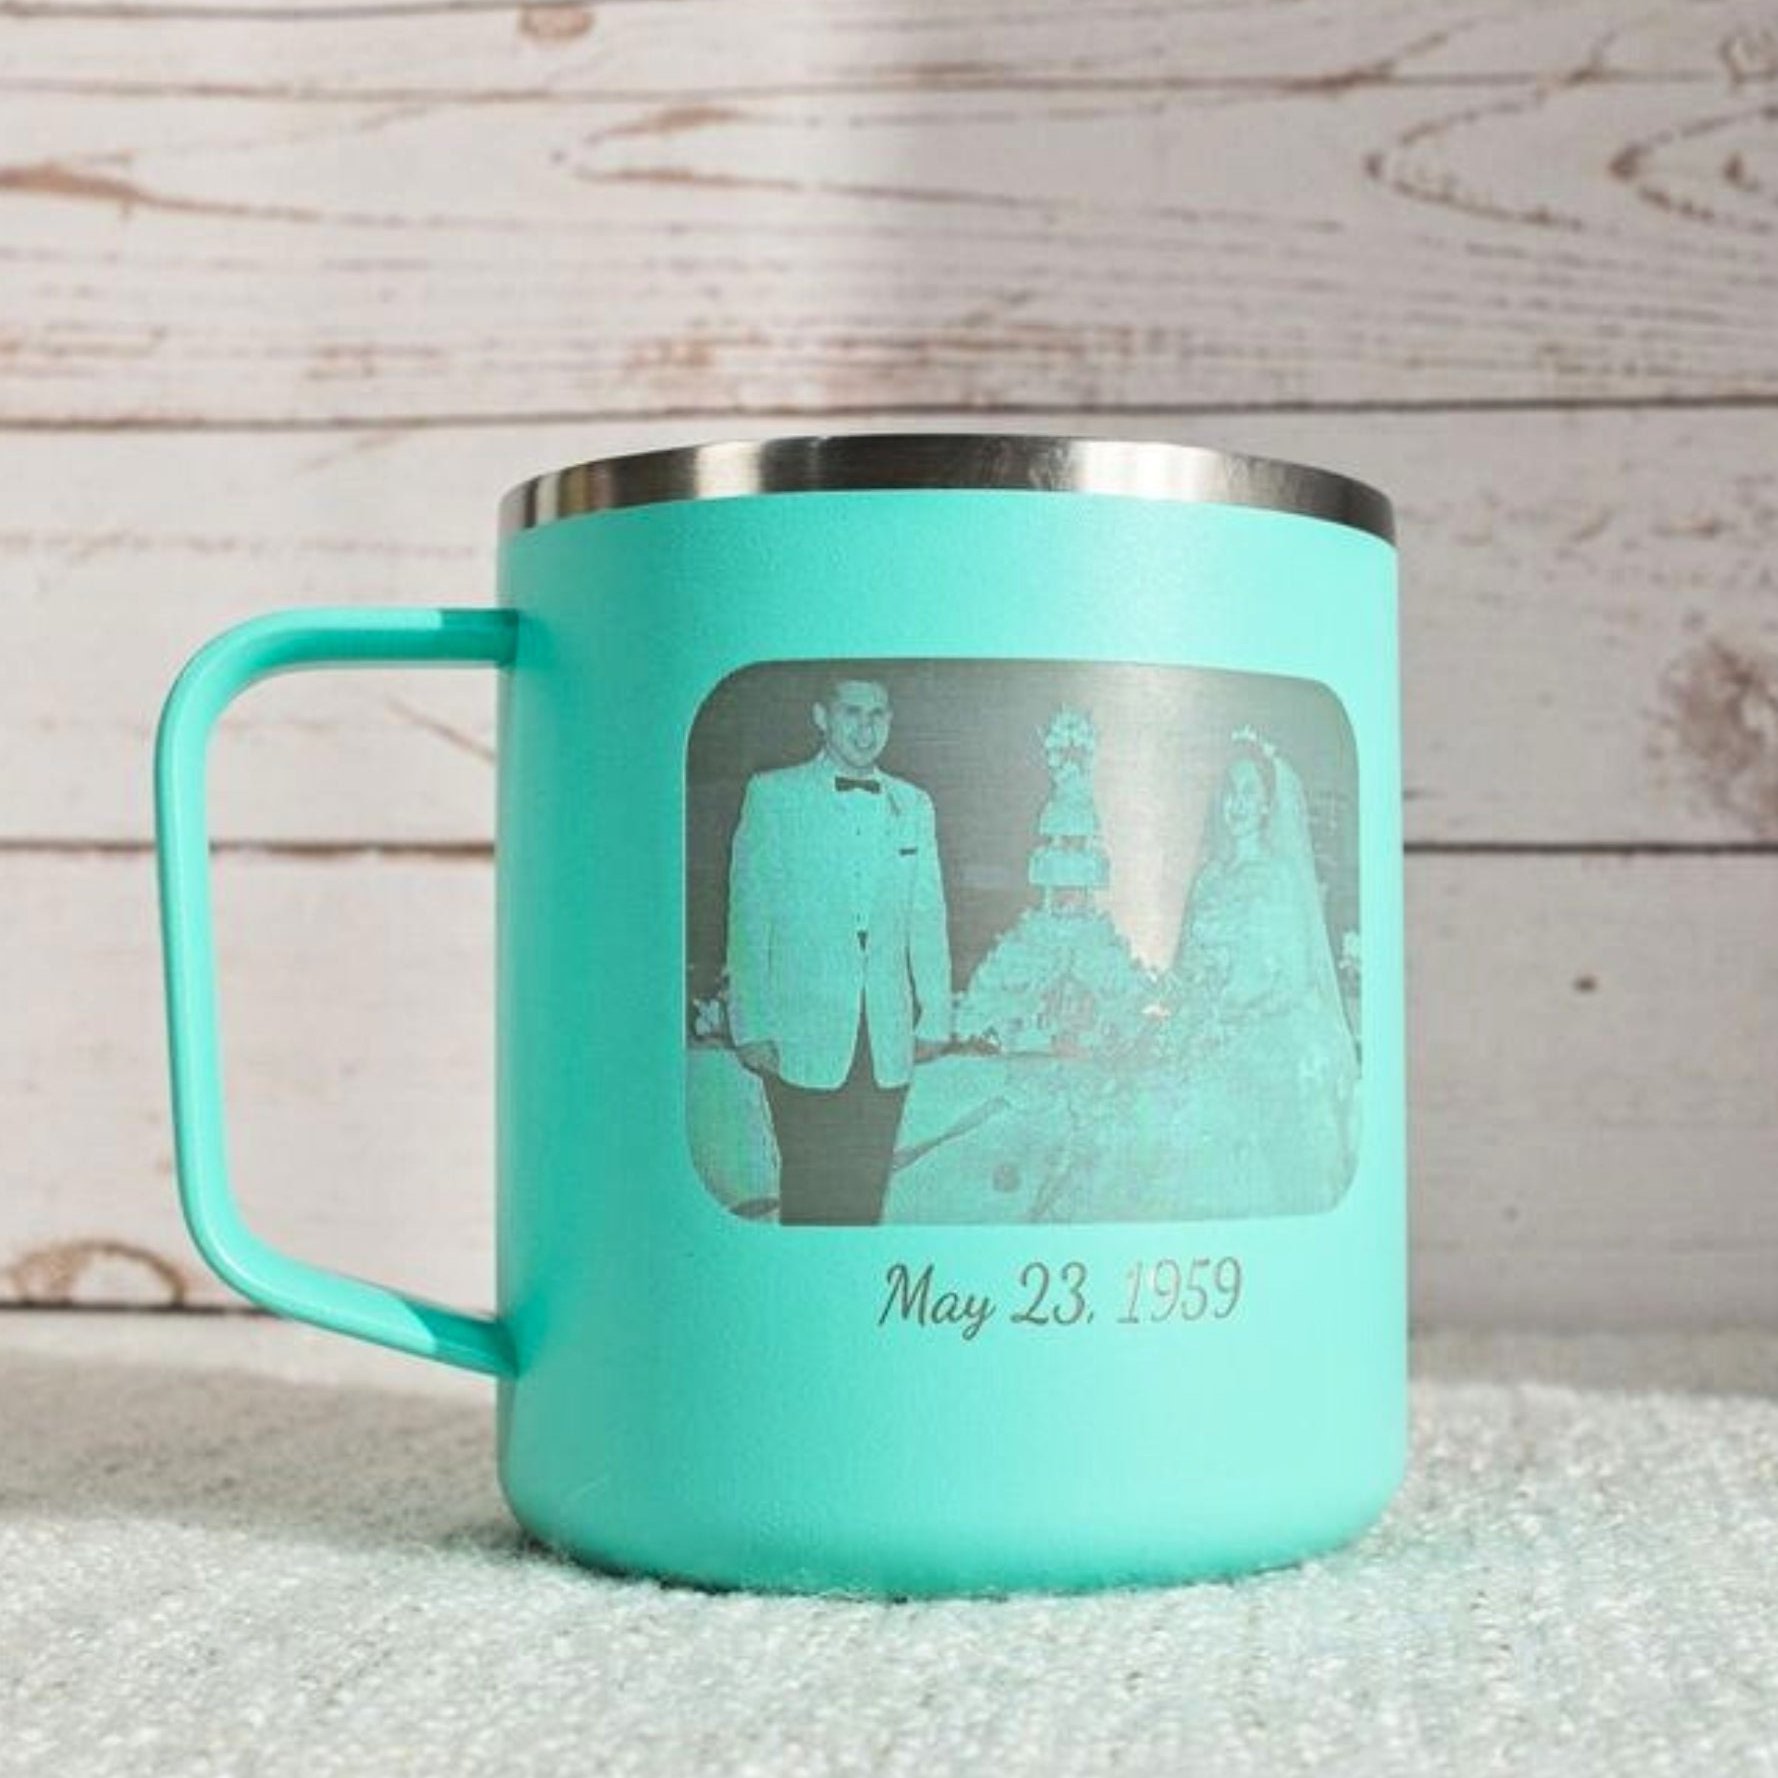 LAMOSE Personalized Insulated mug with engraved images and text for Anniversary celebration, ideal for hot and cold beverages, perfect for gift giving.